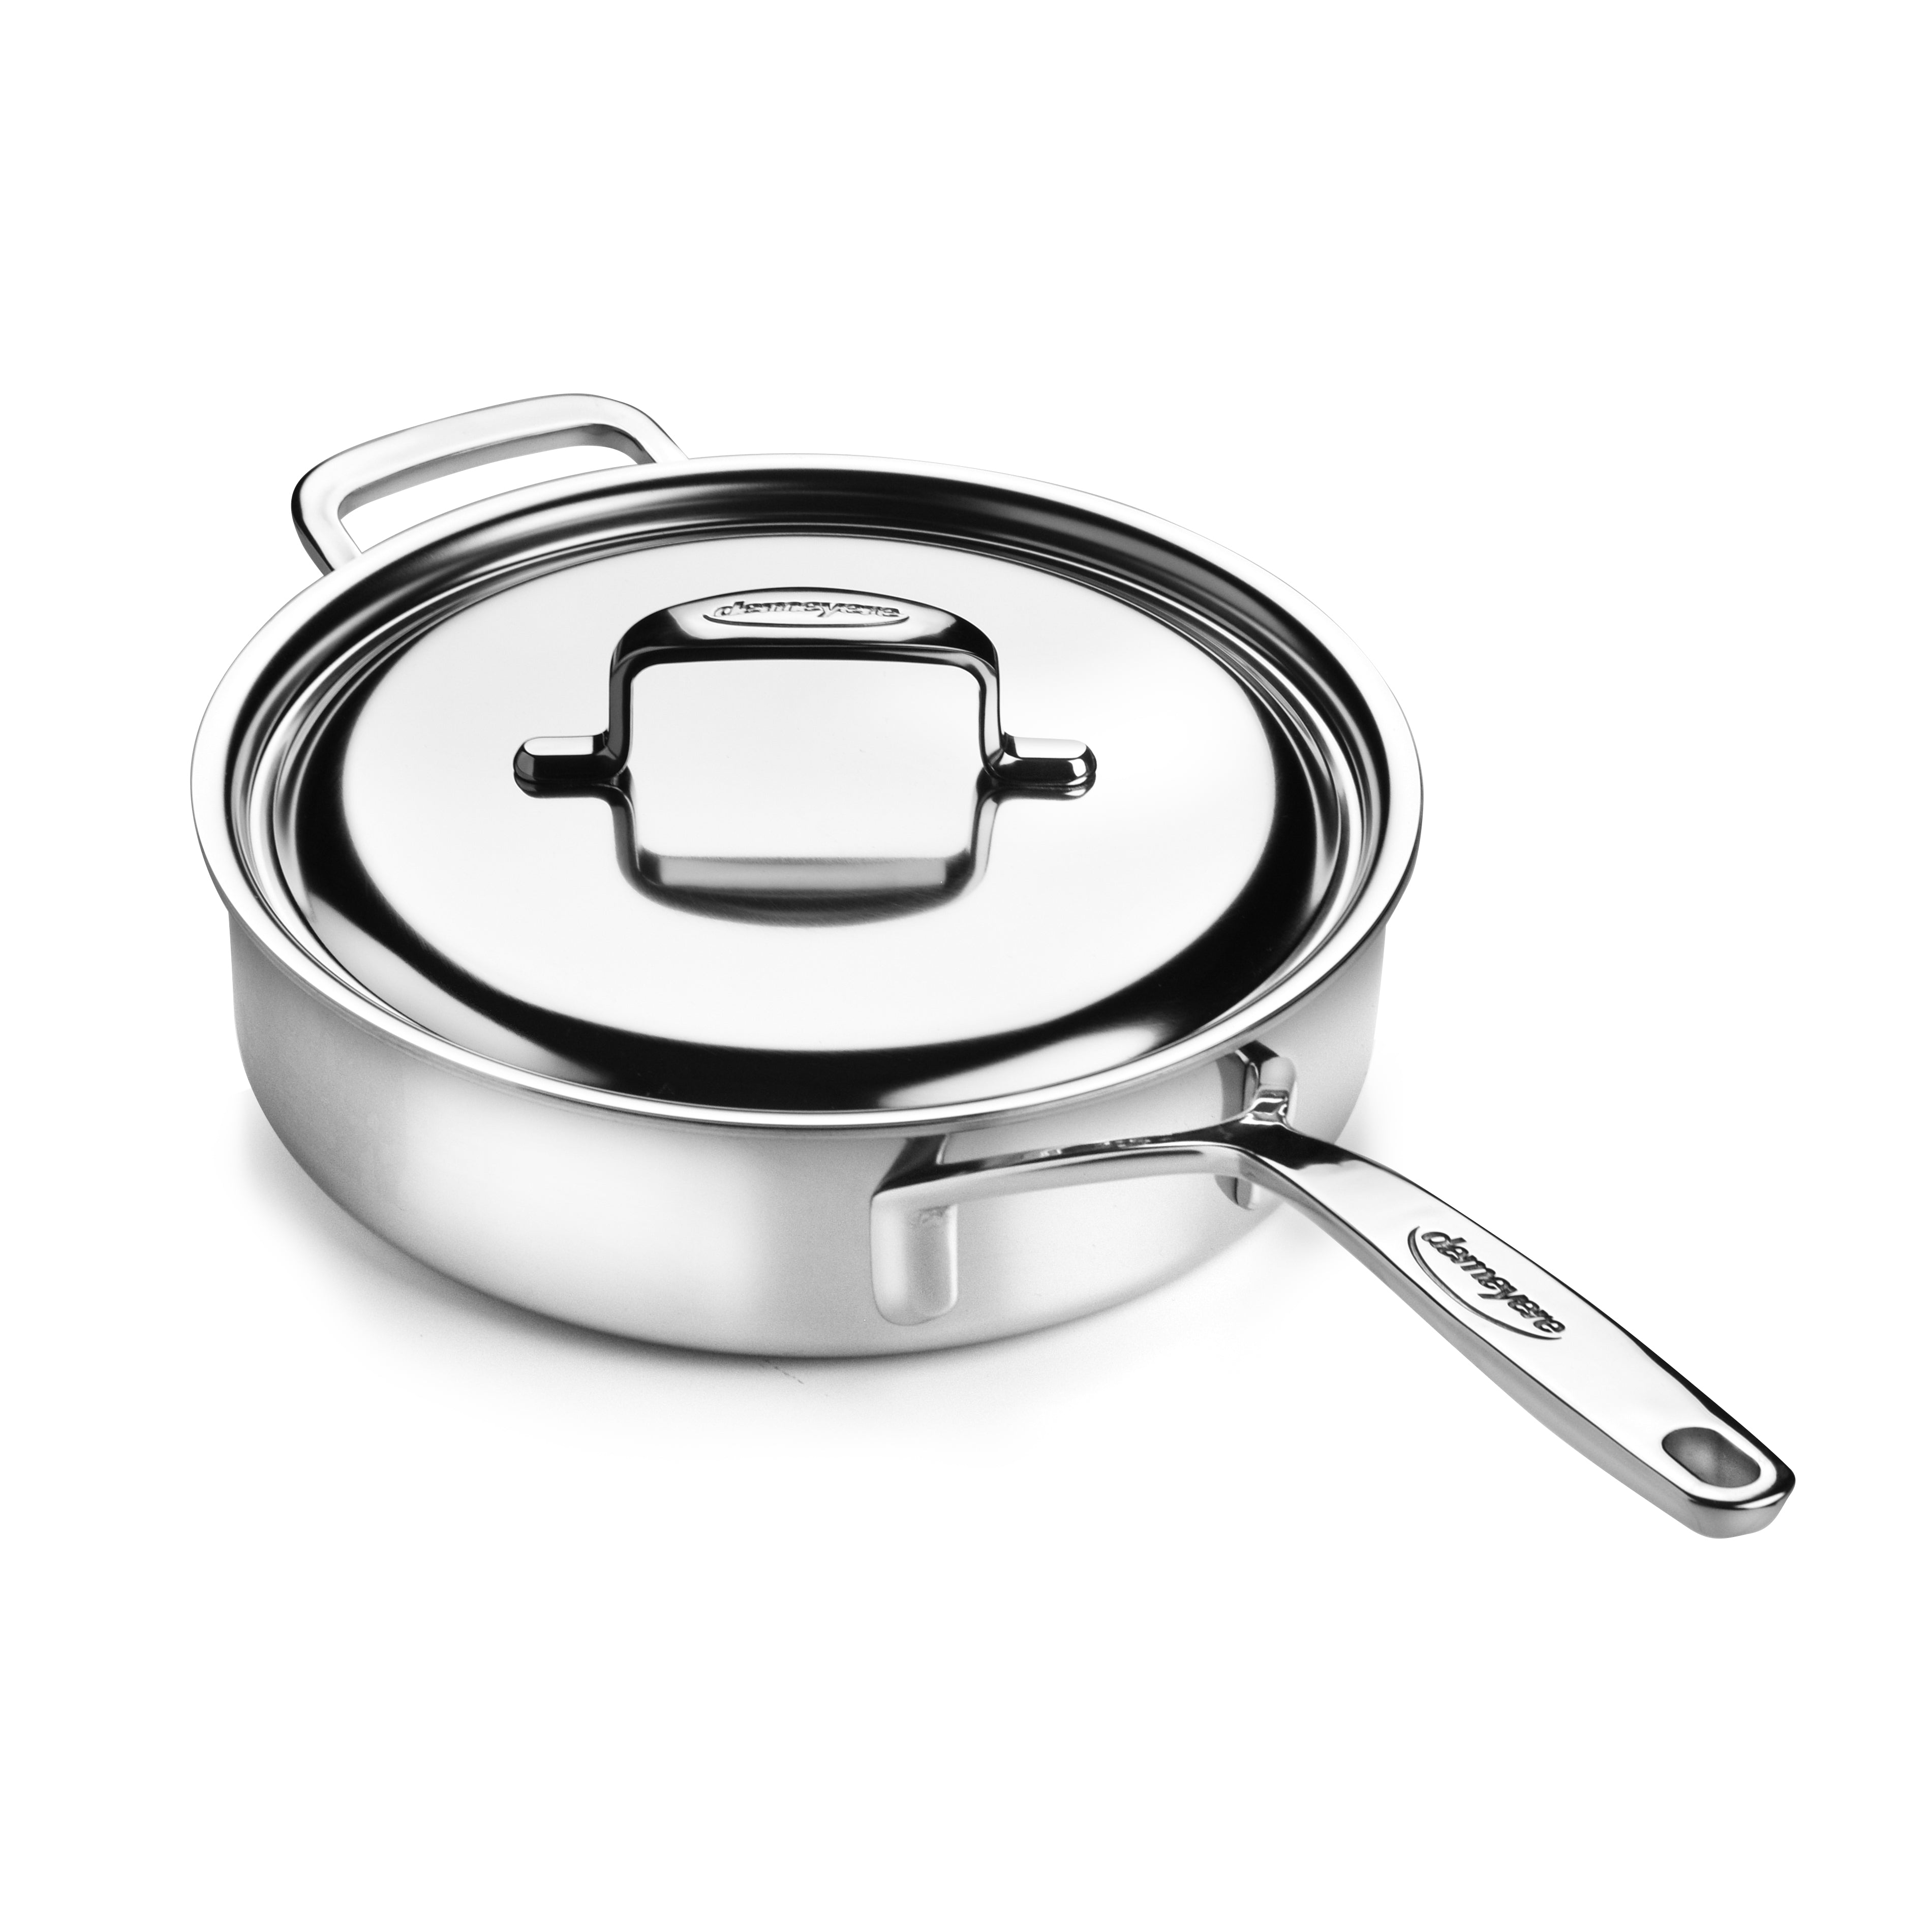 Demeyere 5-Plus Saute Pan - 3-quart Stainless Steel – Cutlery and More